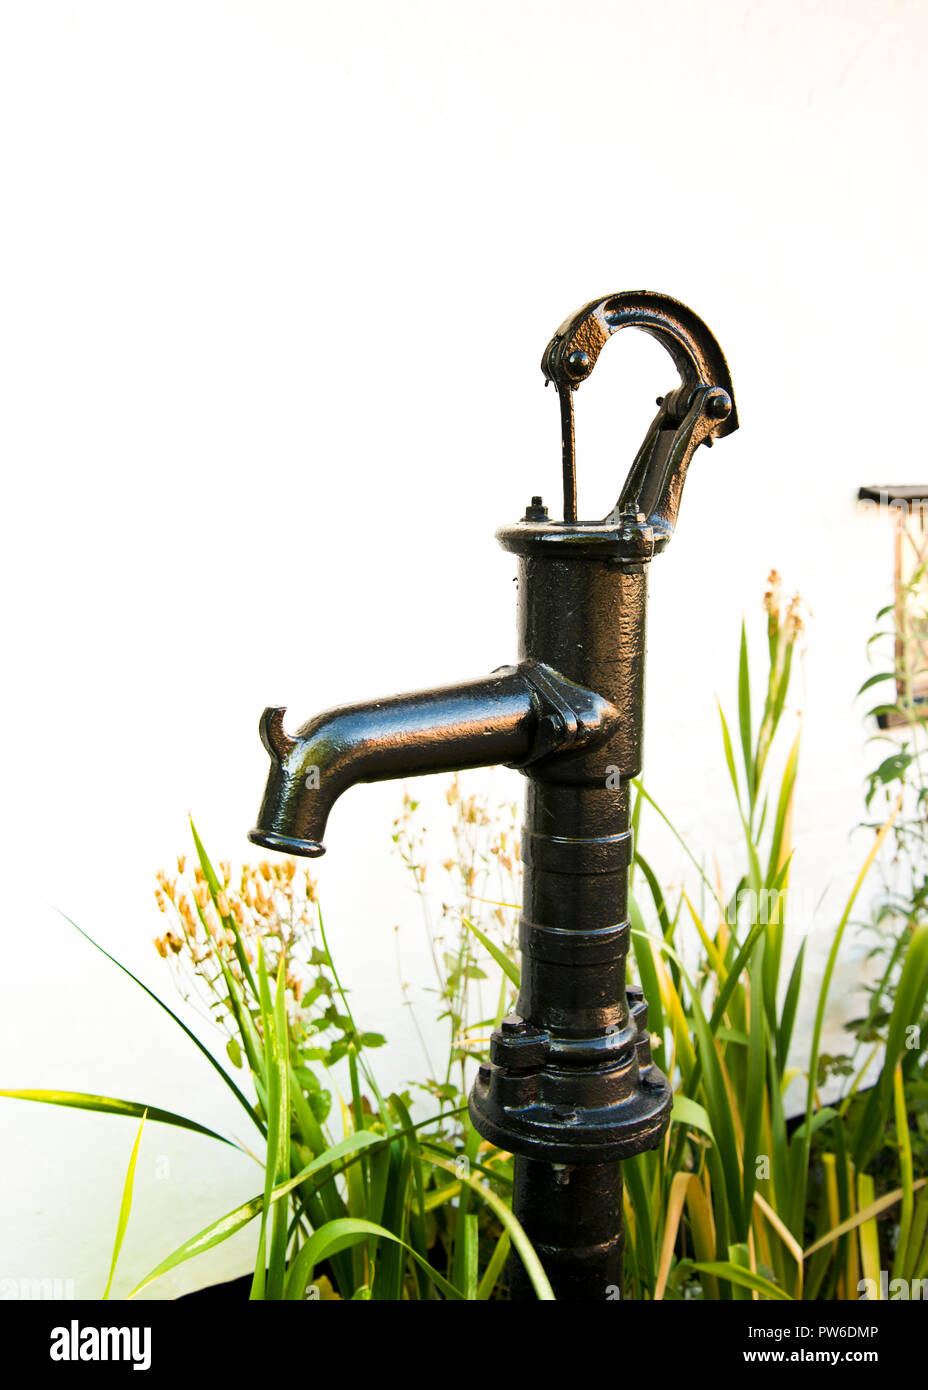 A traditional old / vintage probably Victorian or Edwardian era, hand pump water pump in the garden of an 18th-century house Stock Photo